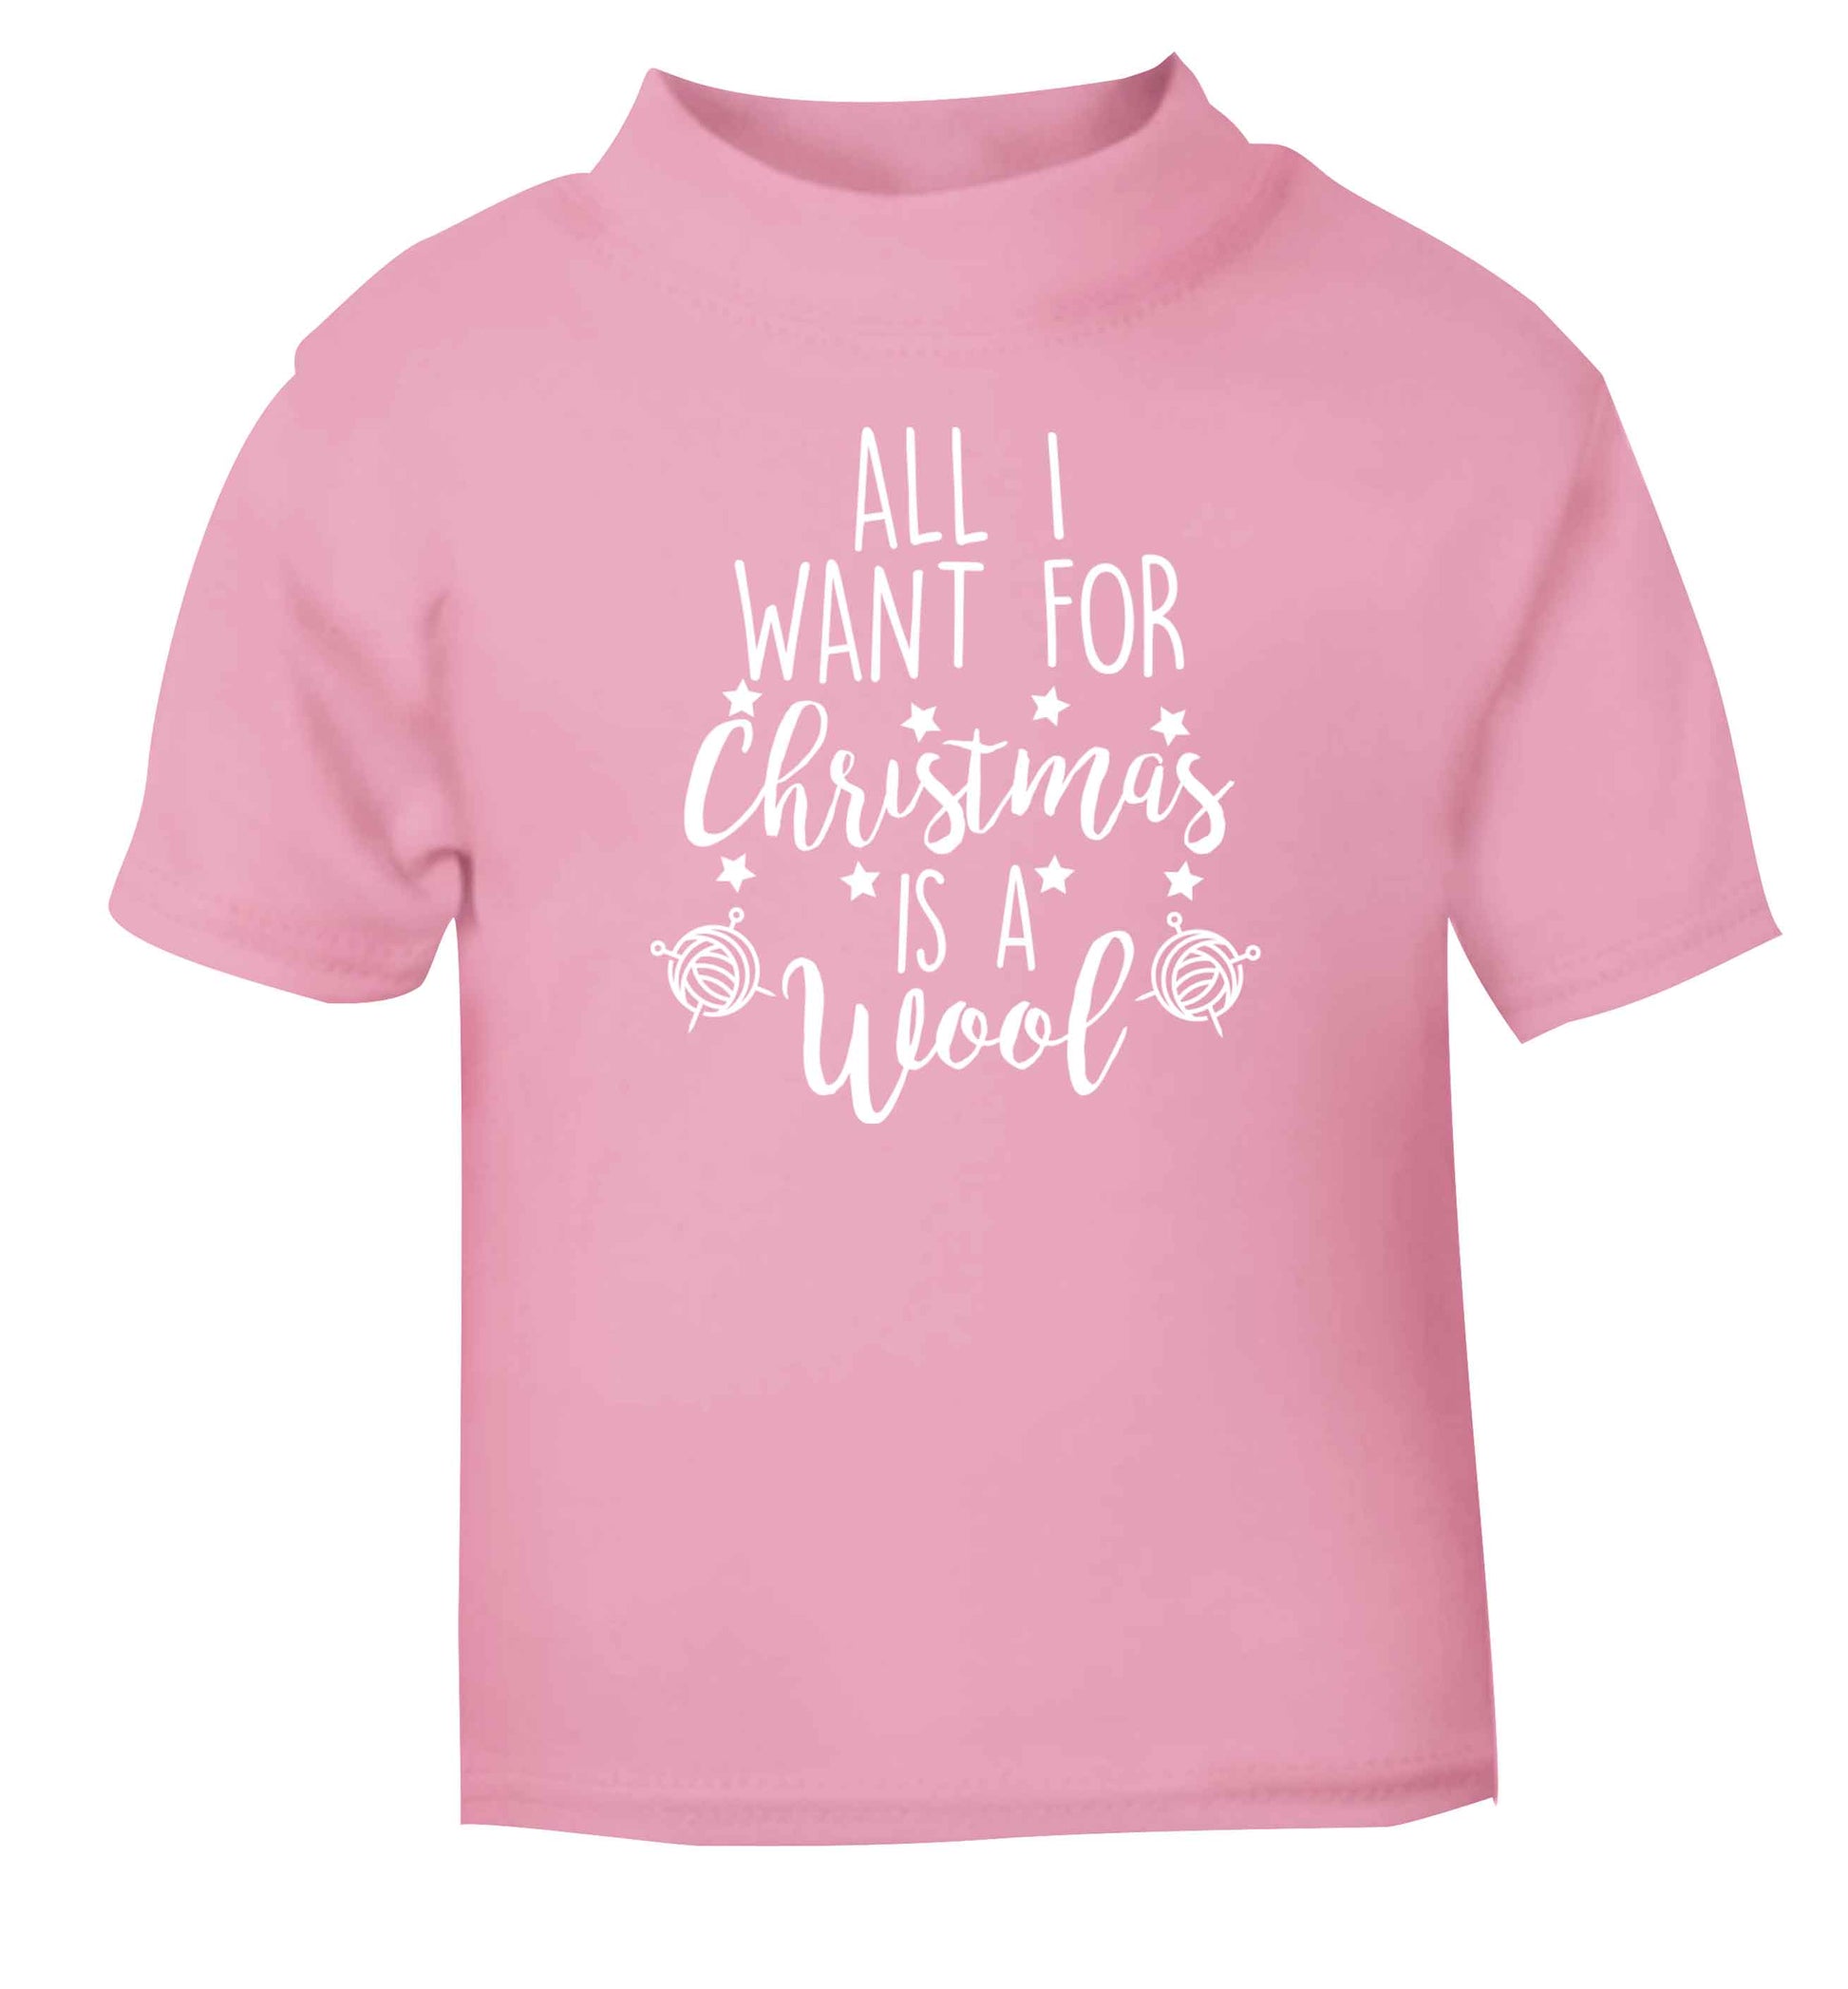 All I want for Christmas is wool! light pink Baby Toddler Tshirt 2 Years